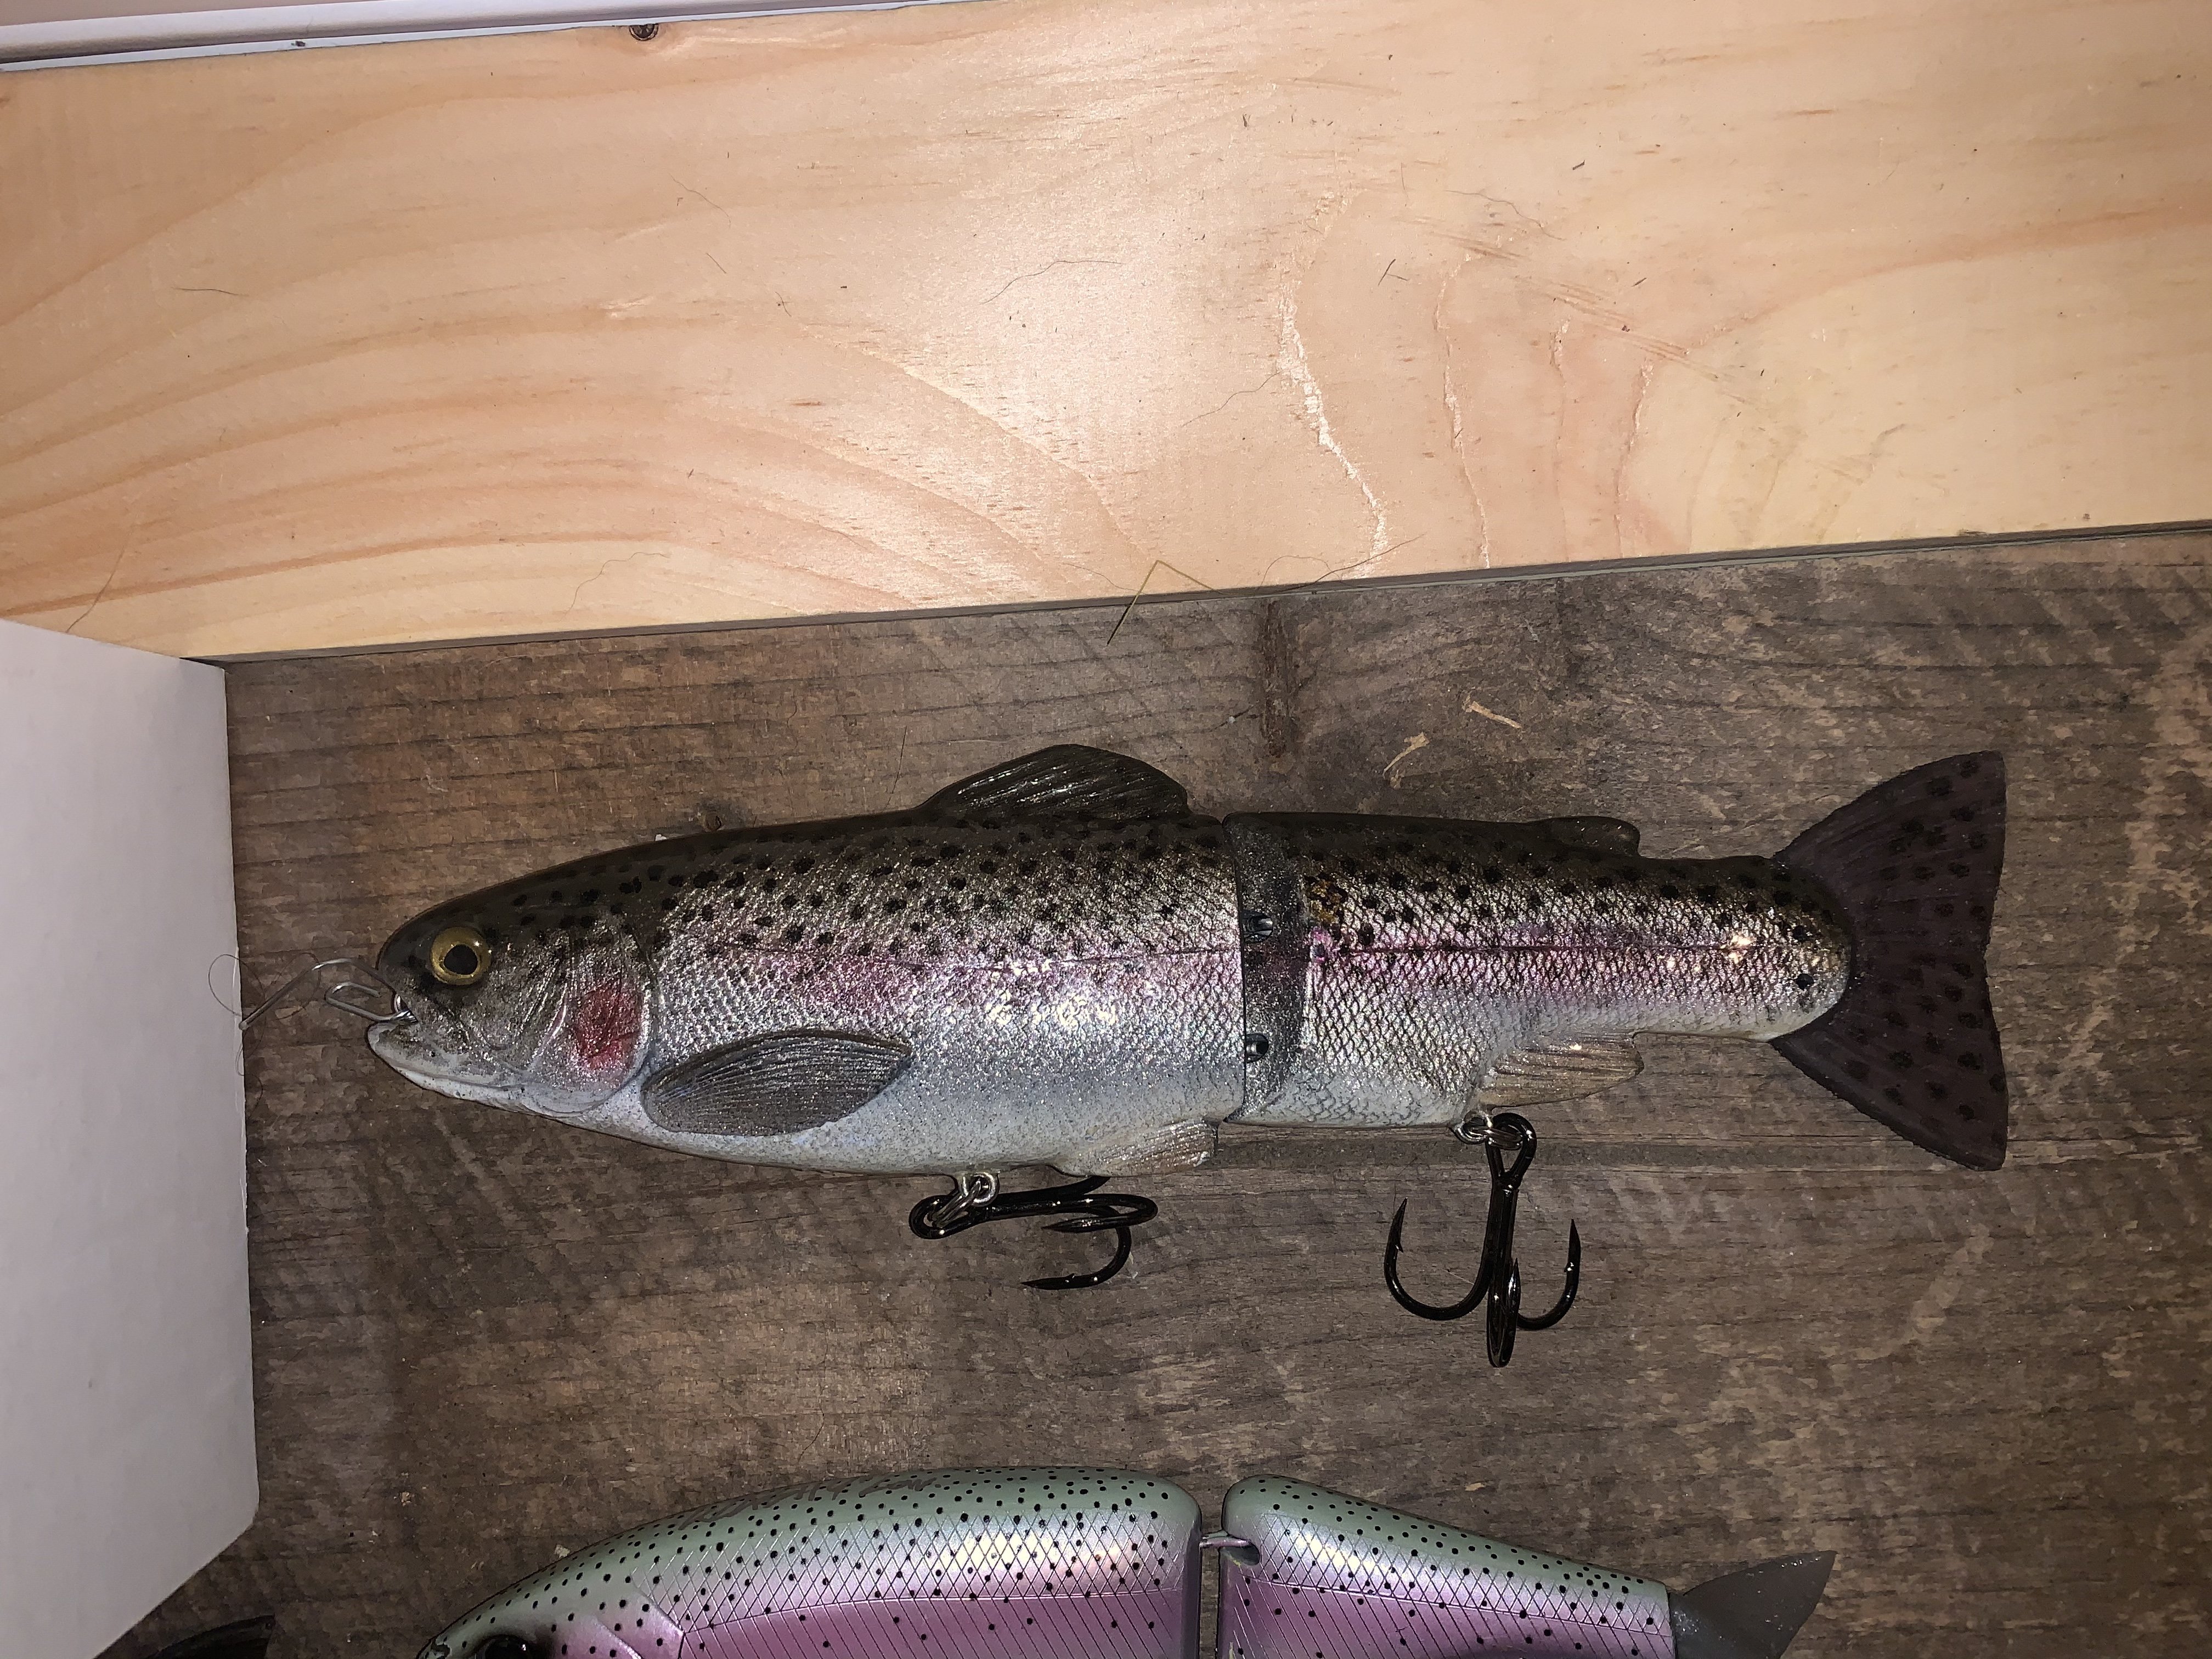 Hinkle Trout, Blank Hinkle Trout, Matt Surface Glide Trout, and